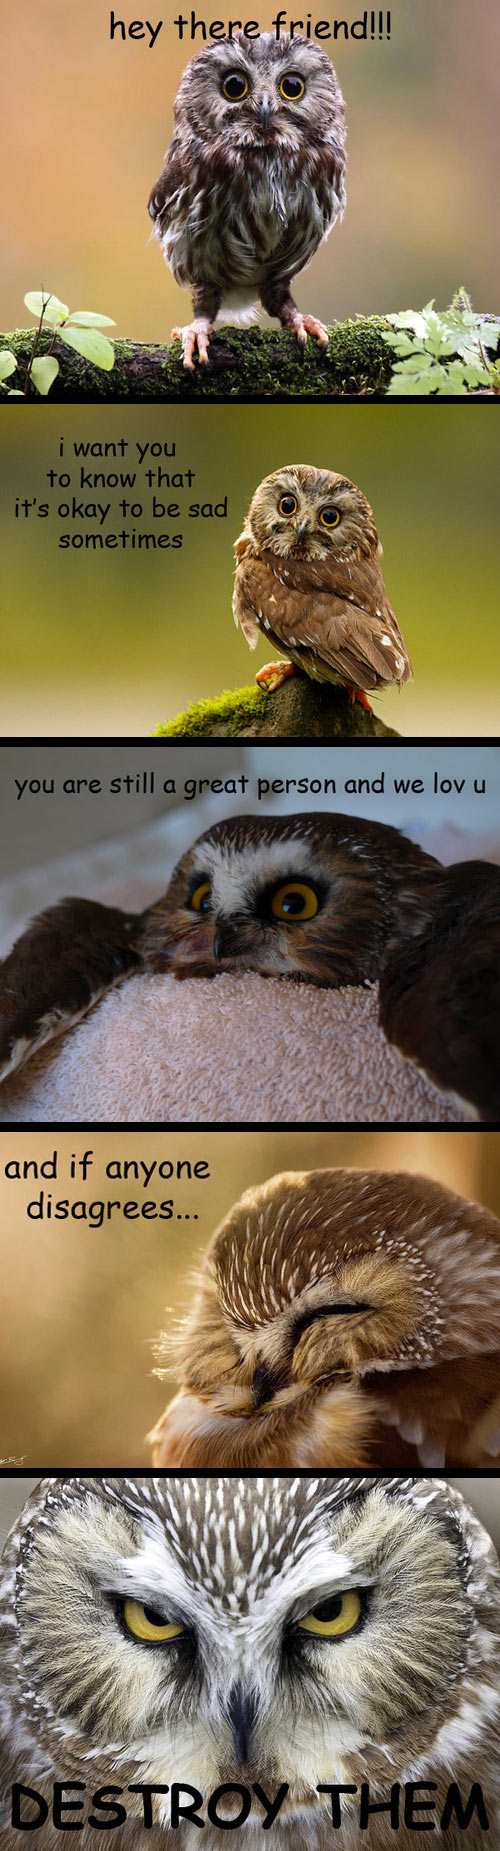 Wise words from Mr. Owl.